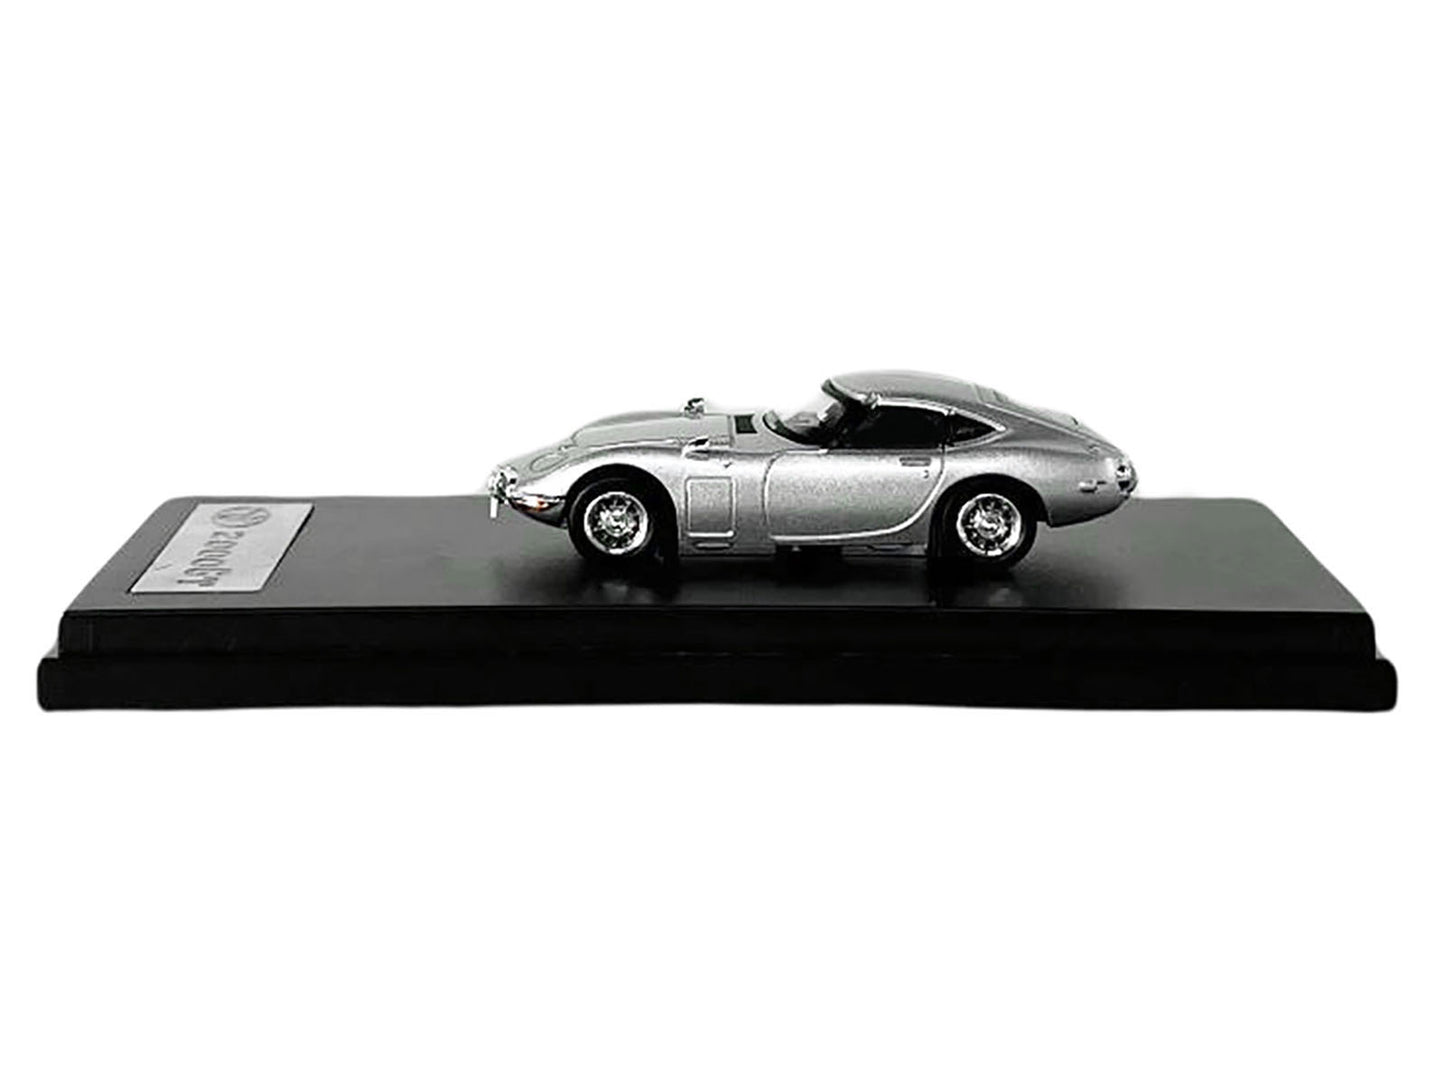 Brand new 1/64 scale diecast car model of Toyota 2000GT RHD (Right Hand Drive) Silver Metallic die cast model car by LCD